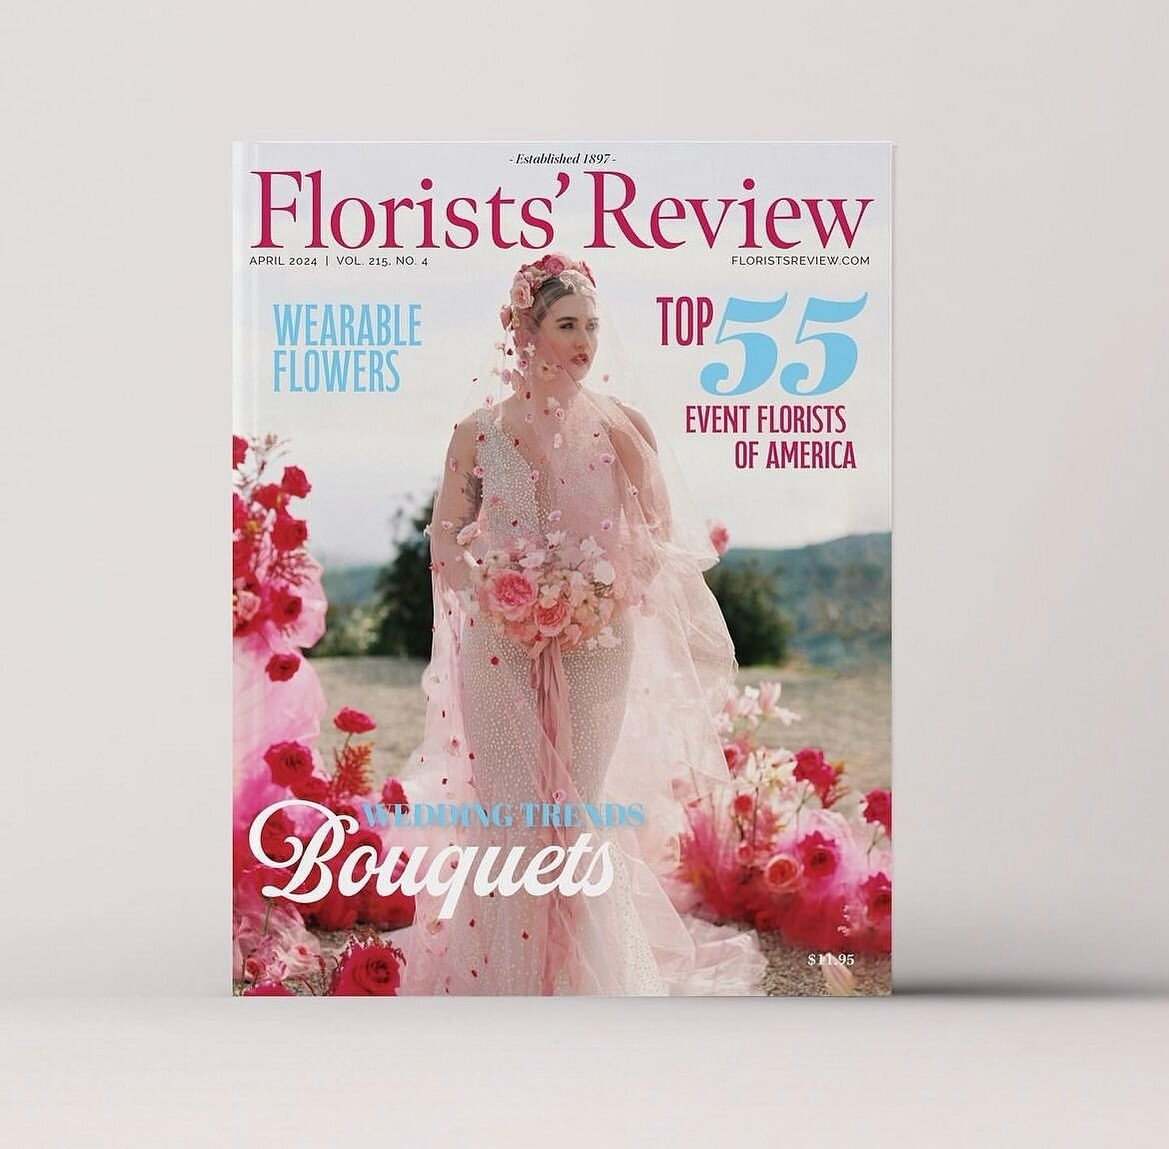 We are so thrilled and honored to be recognized as one of the Top 55 event florists of America by @florists_review! Featured among some of the best of the best!🌿